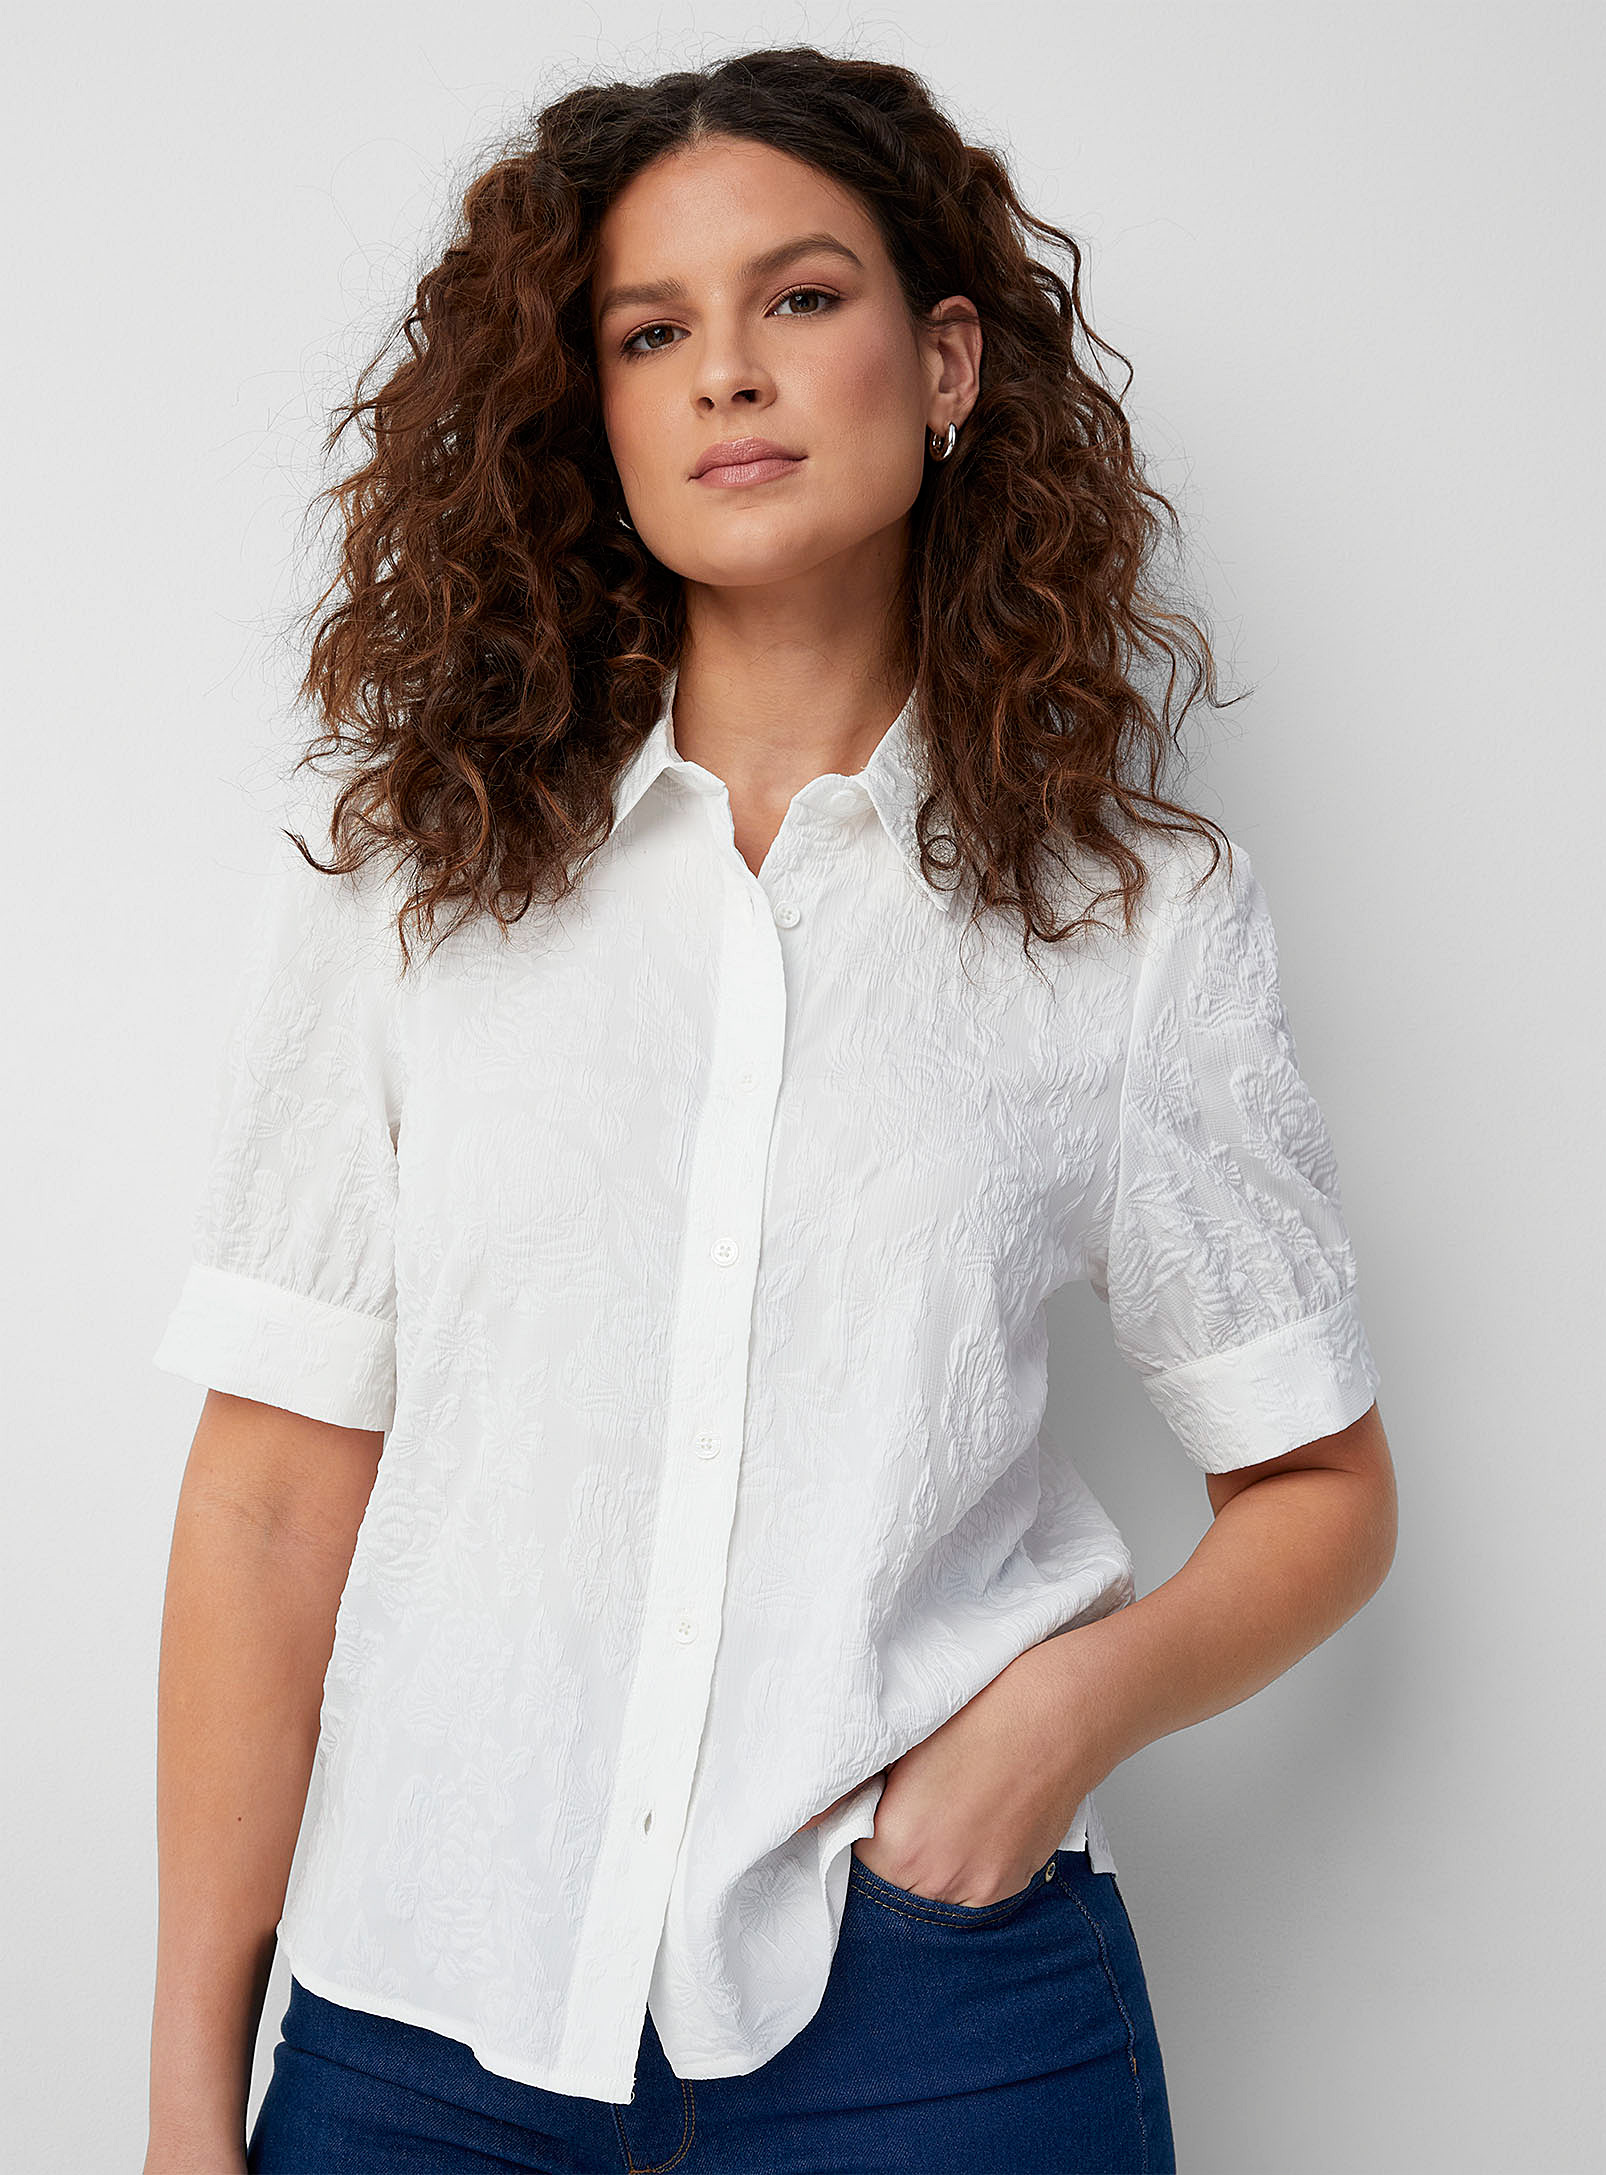 Contemporaine Embossed Floral Shirt In Ivory White